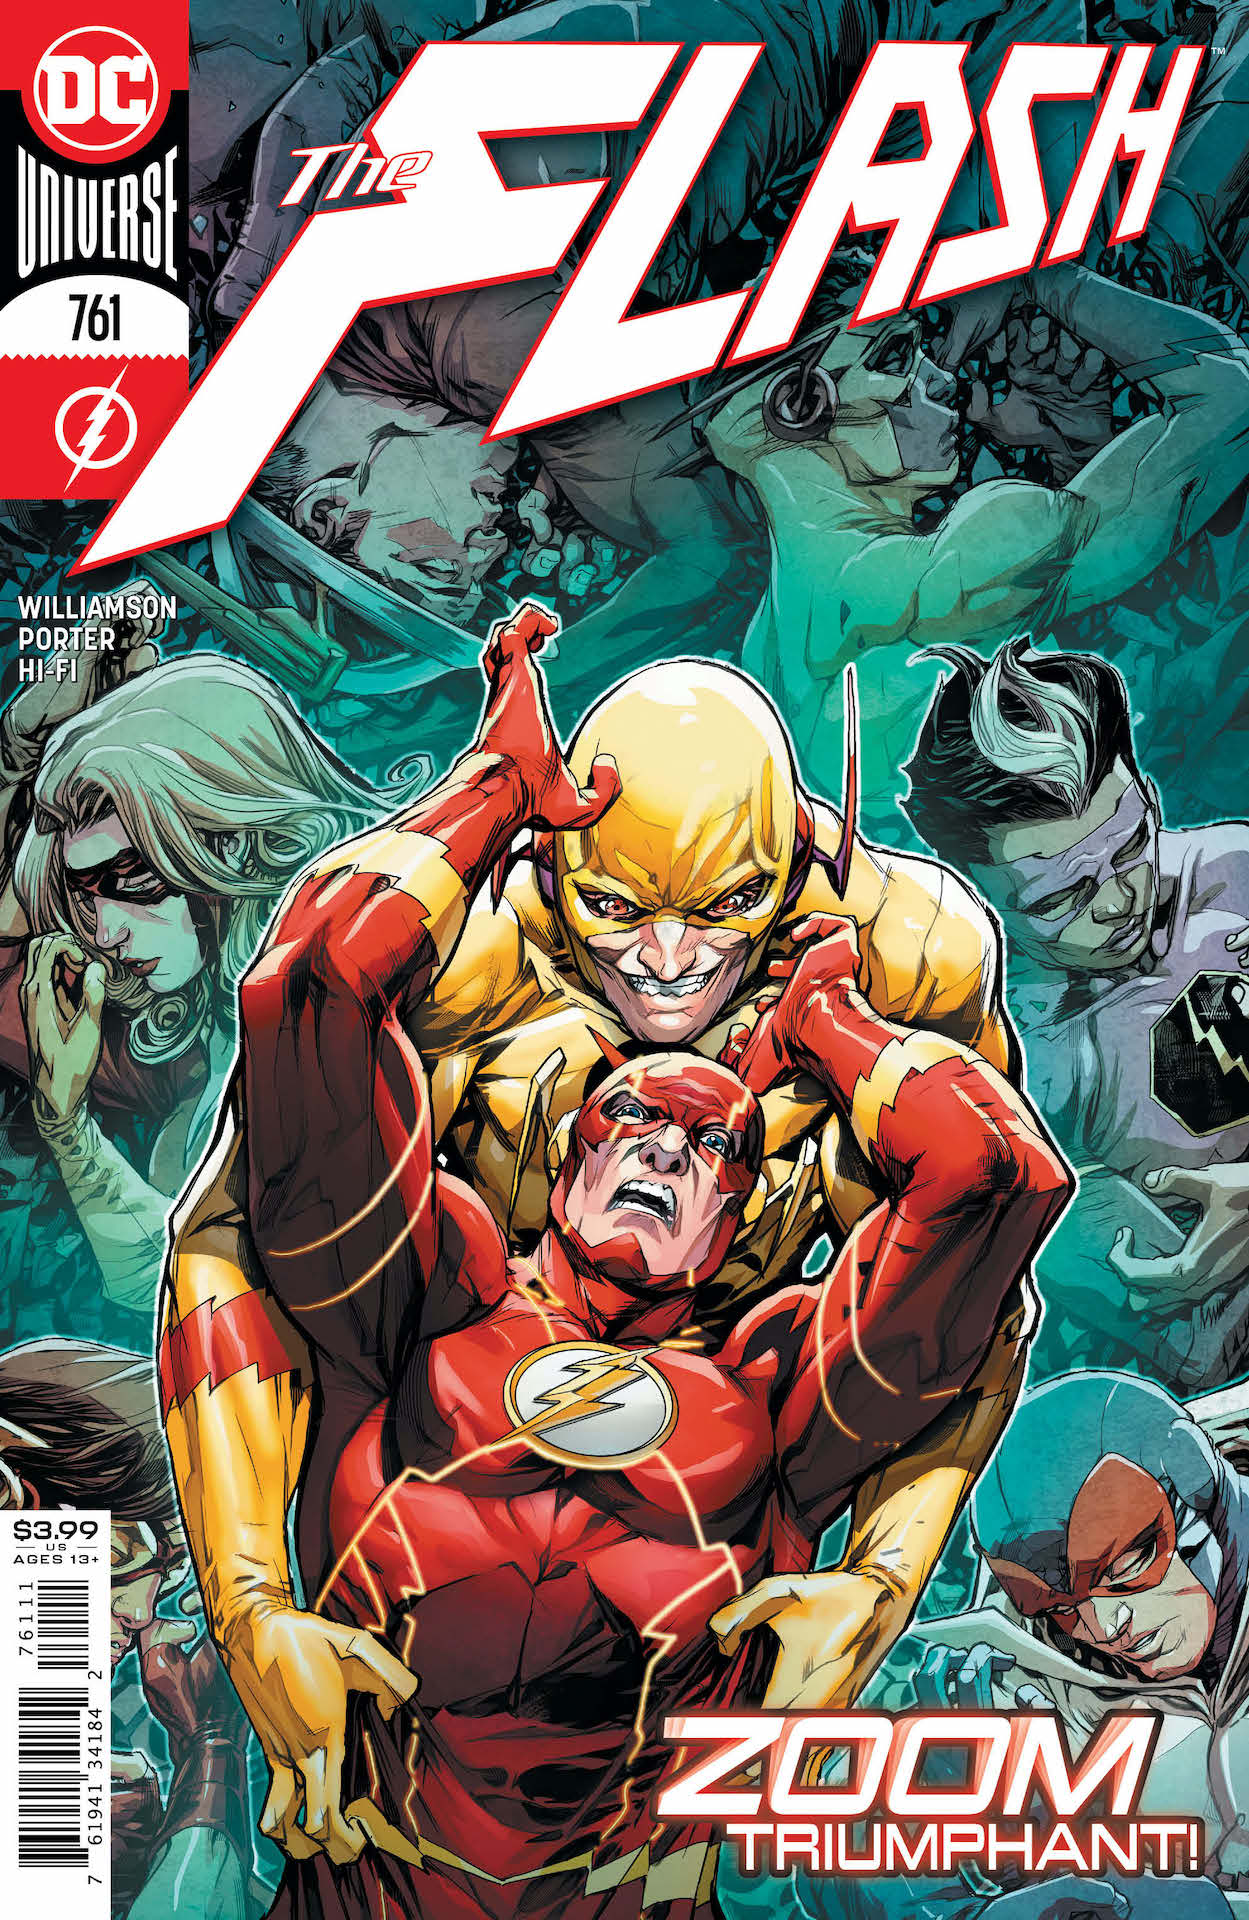 DC Preview: The Flash #671